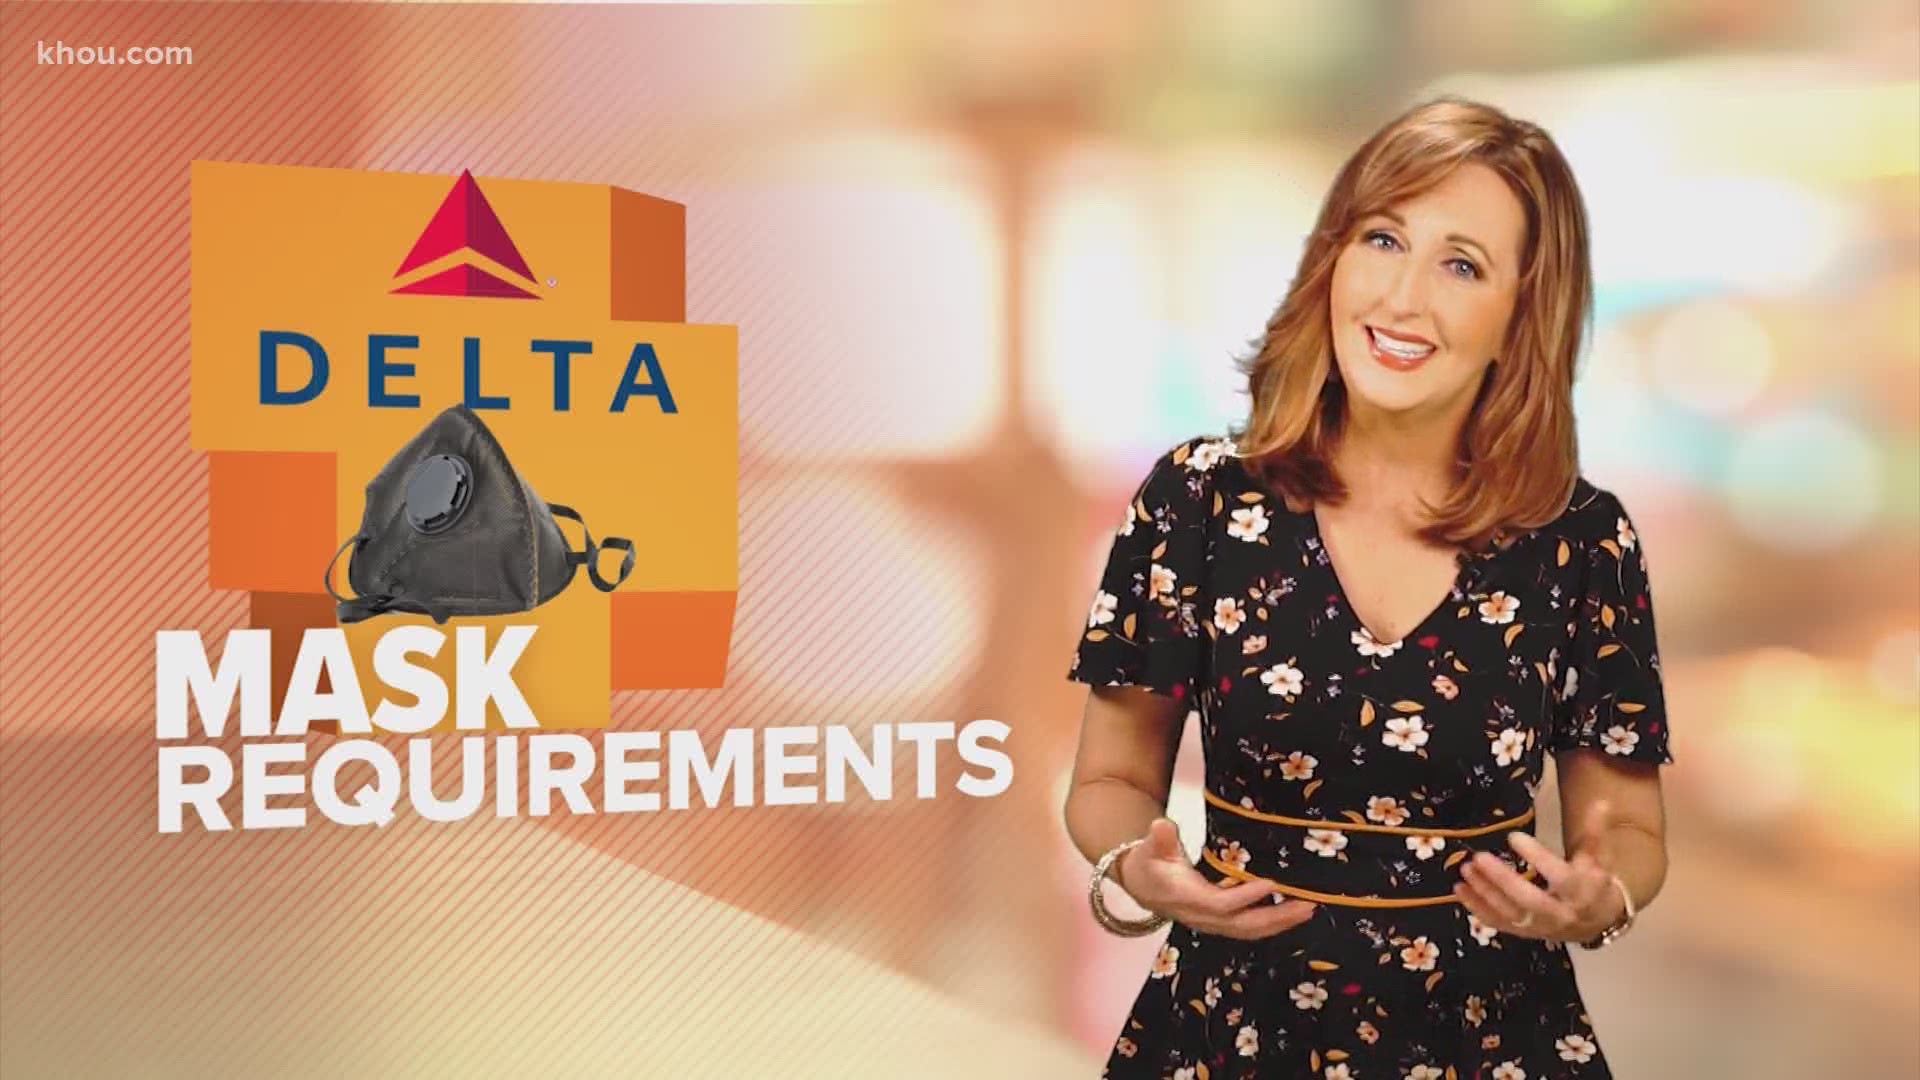 Delta requiring all travelers to wear face masks, but not every mask qualifies. Apple delays iPhone 12 release due to COVID issues. CBS All Access adds new content.